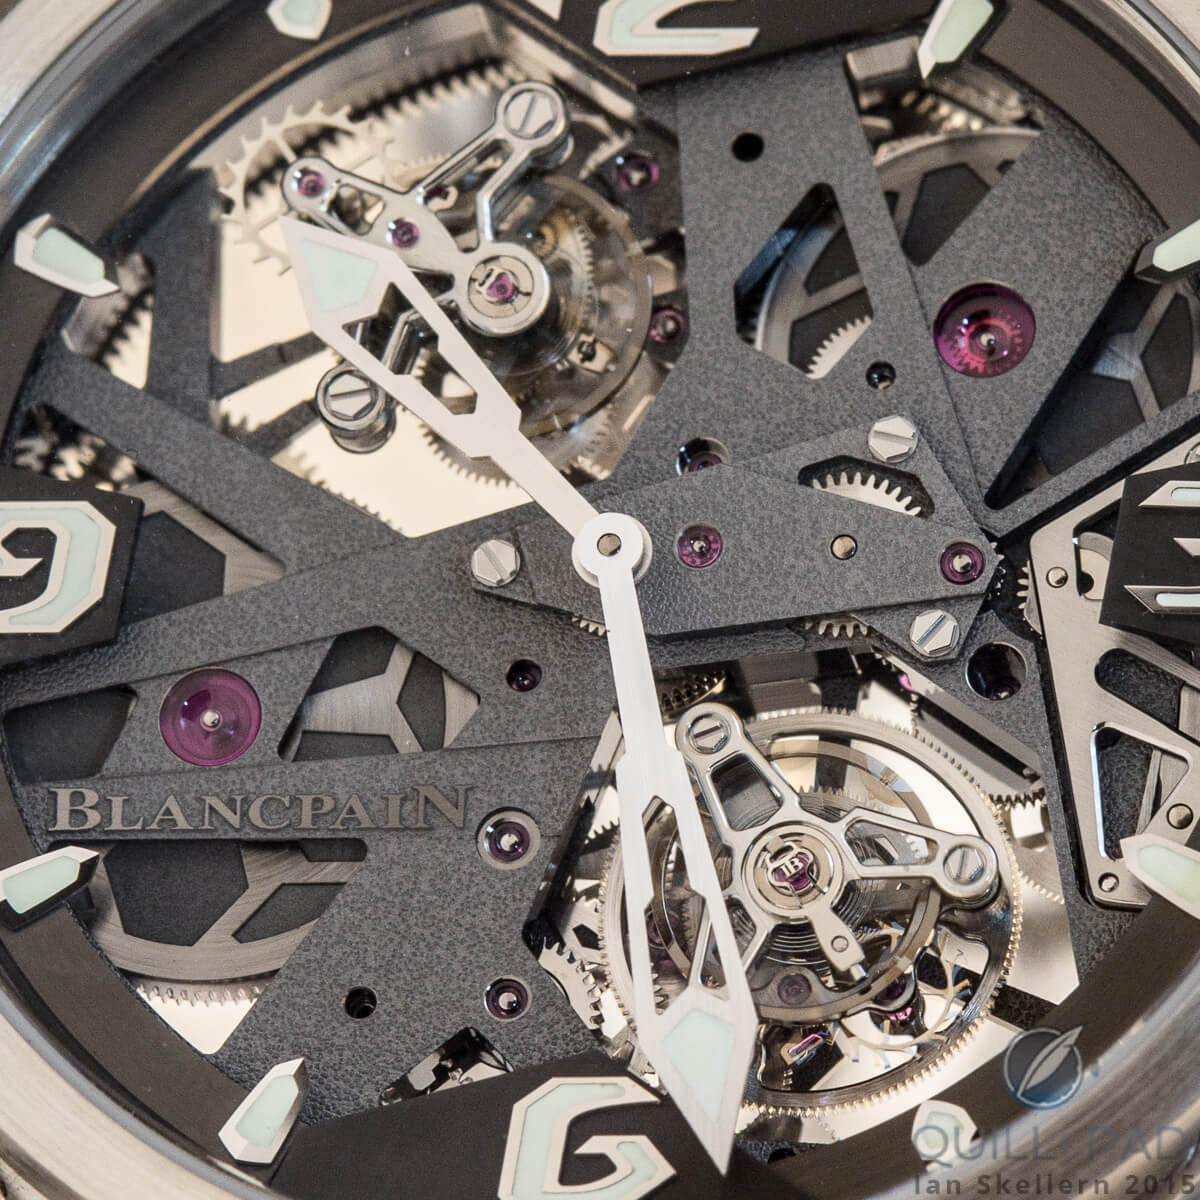 A close look at the dial side of the Blancpain L-evolution Tourbillon Carrousel: the tourbillon regulator is at the top of this image and the carrousel at the bottom